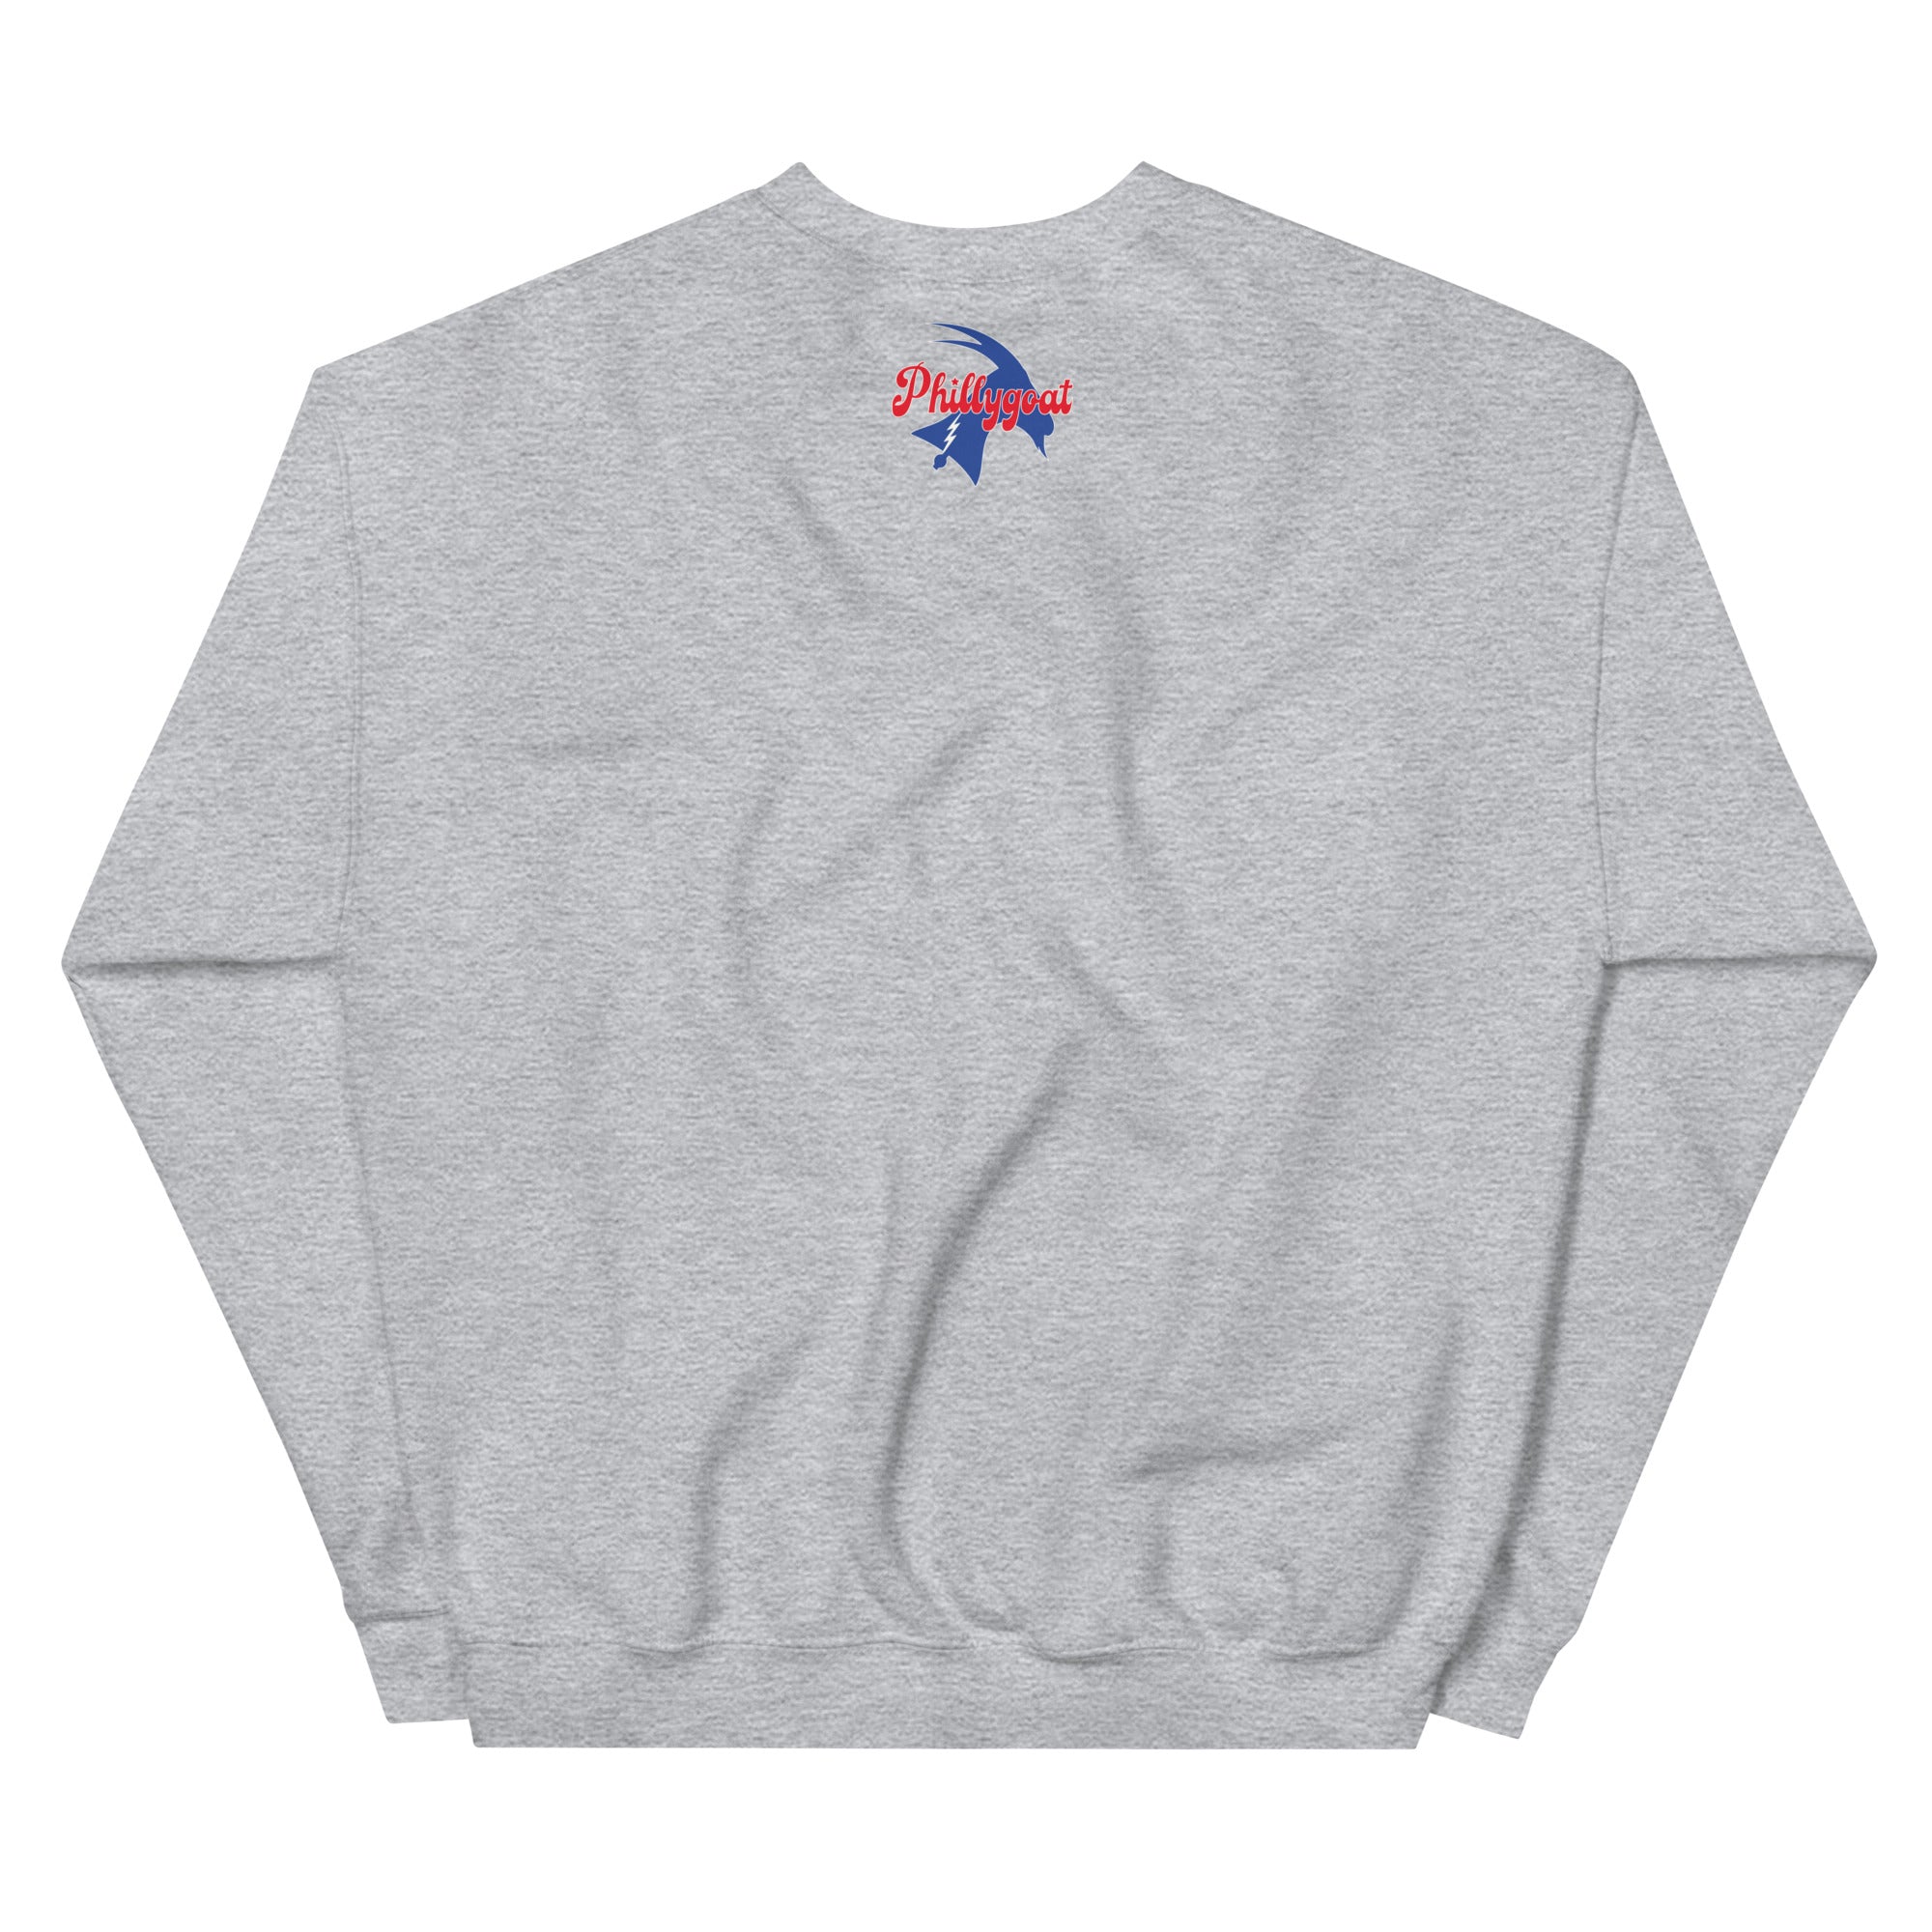 "Philly Invented Grit" Sweatshirt